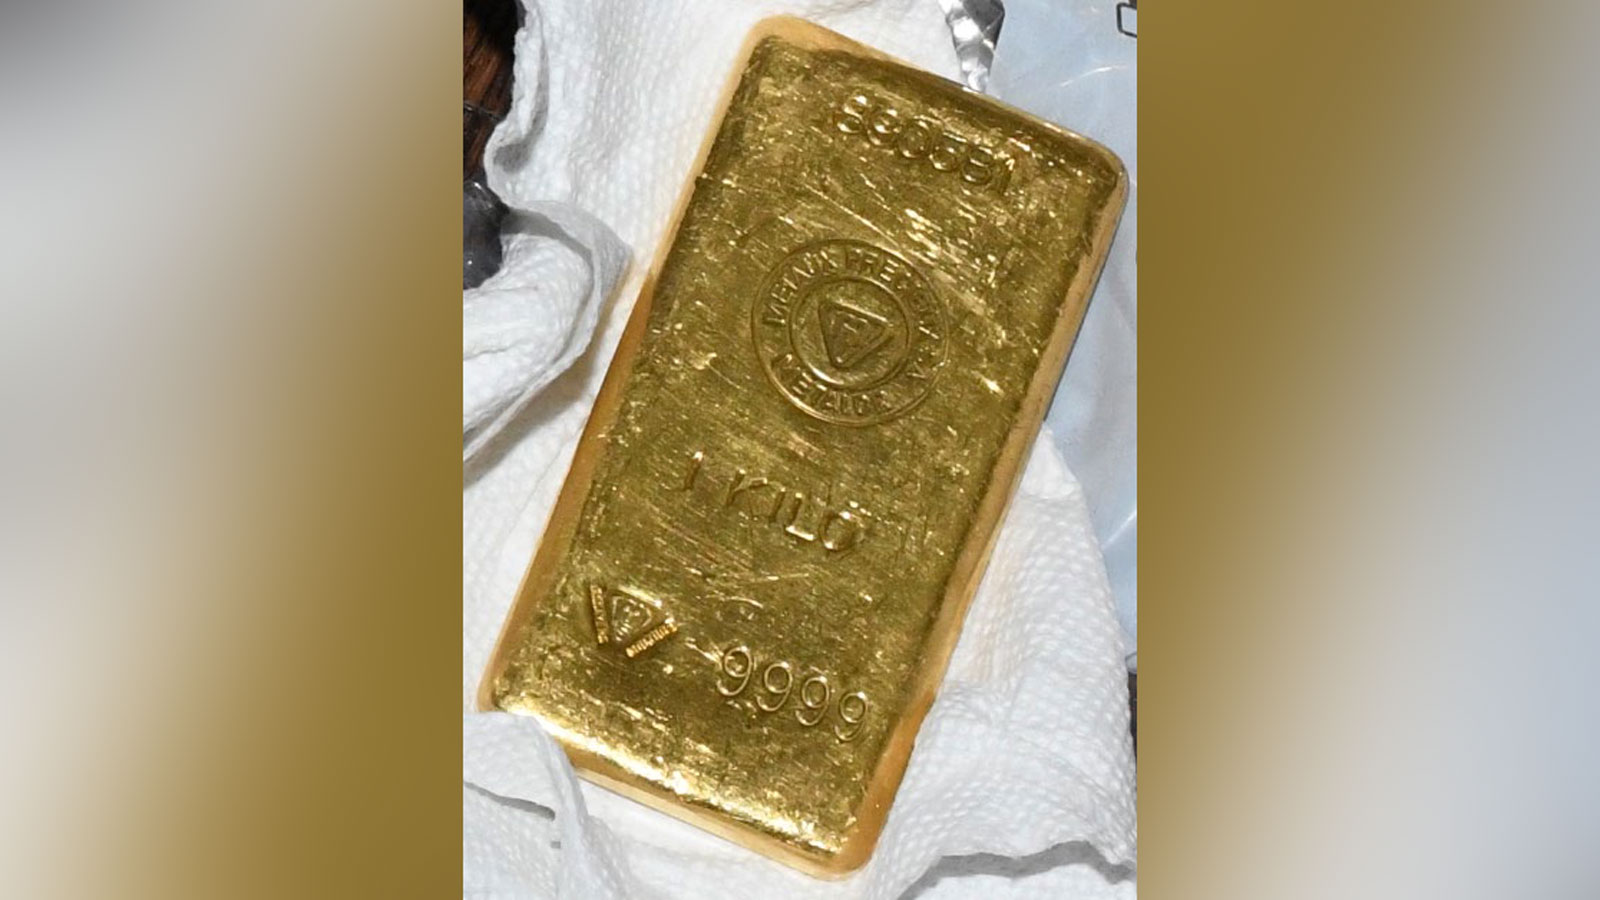 During a court-authorized search of the home, agents found over one hundred thousand dollars’ worth of gold bars in the home.